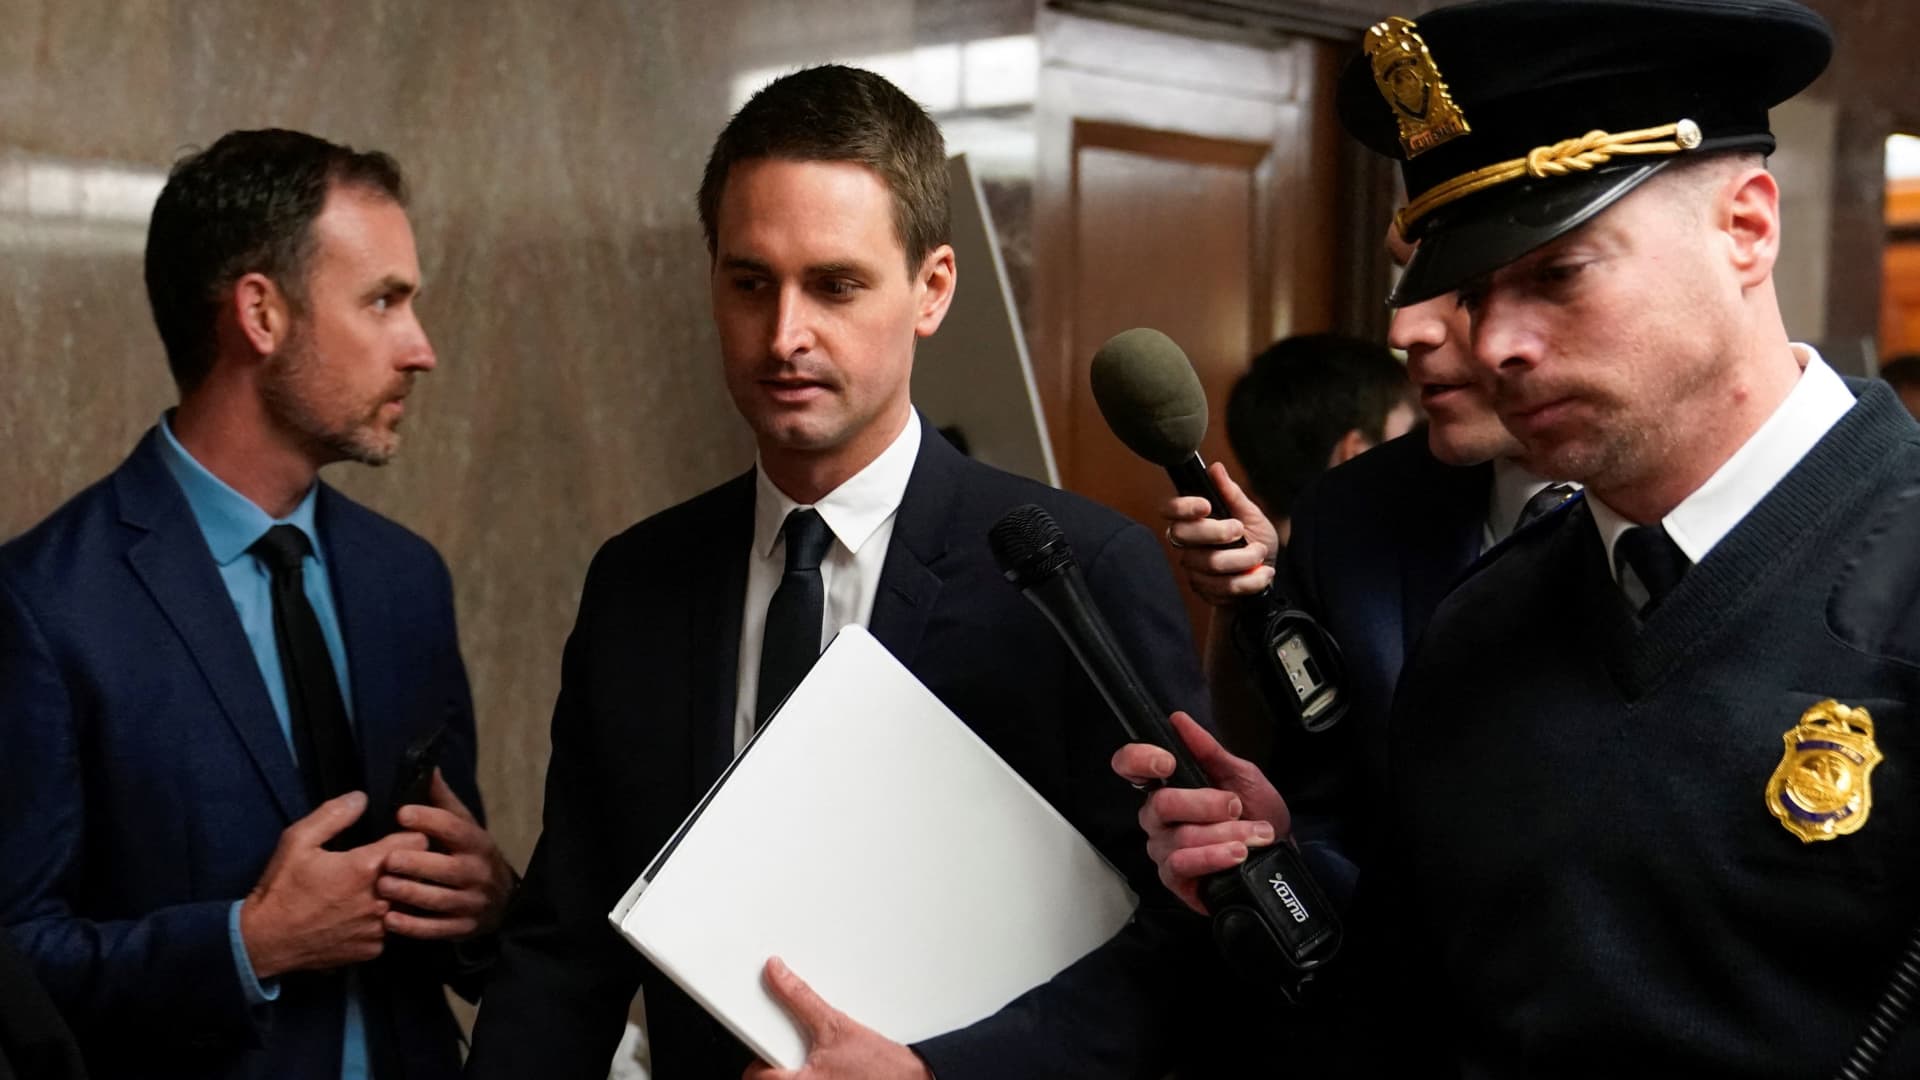 Snap to lay off 10% of global workforce, around 500 employees